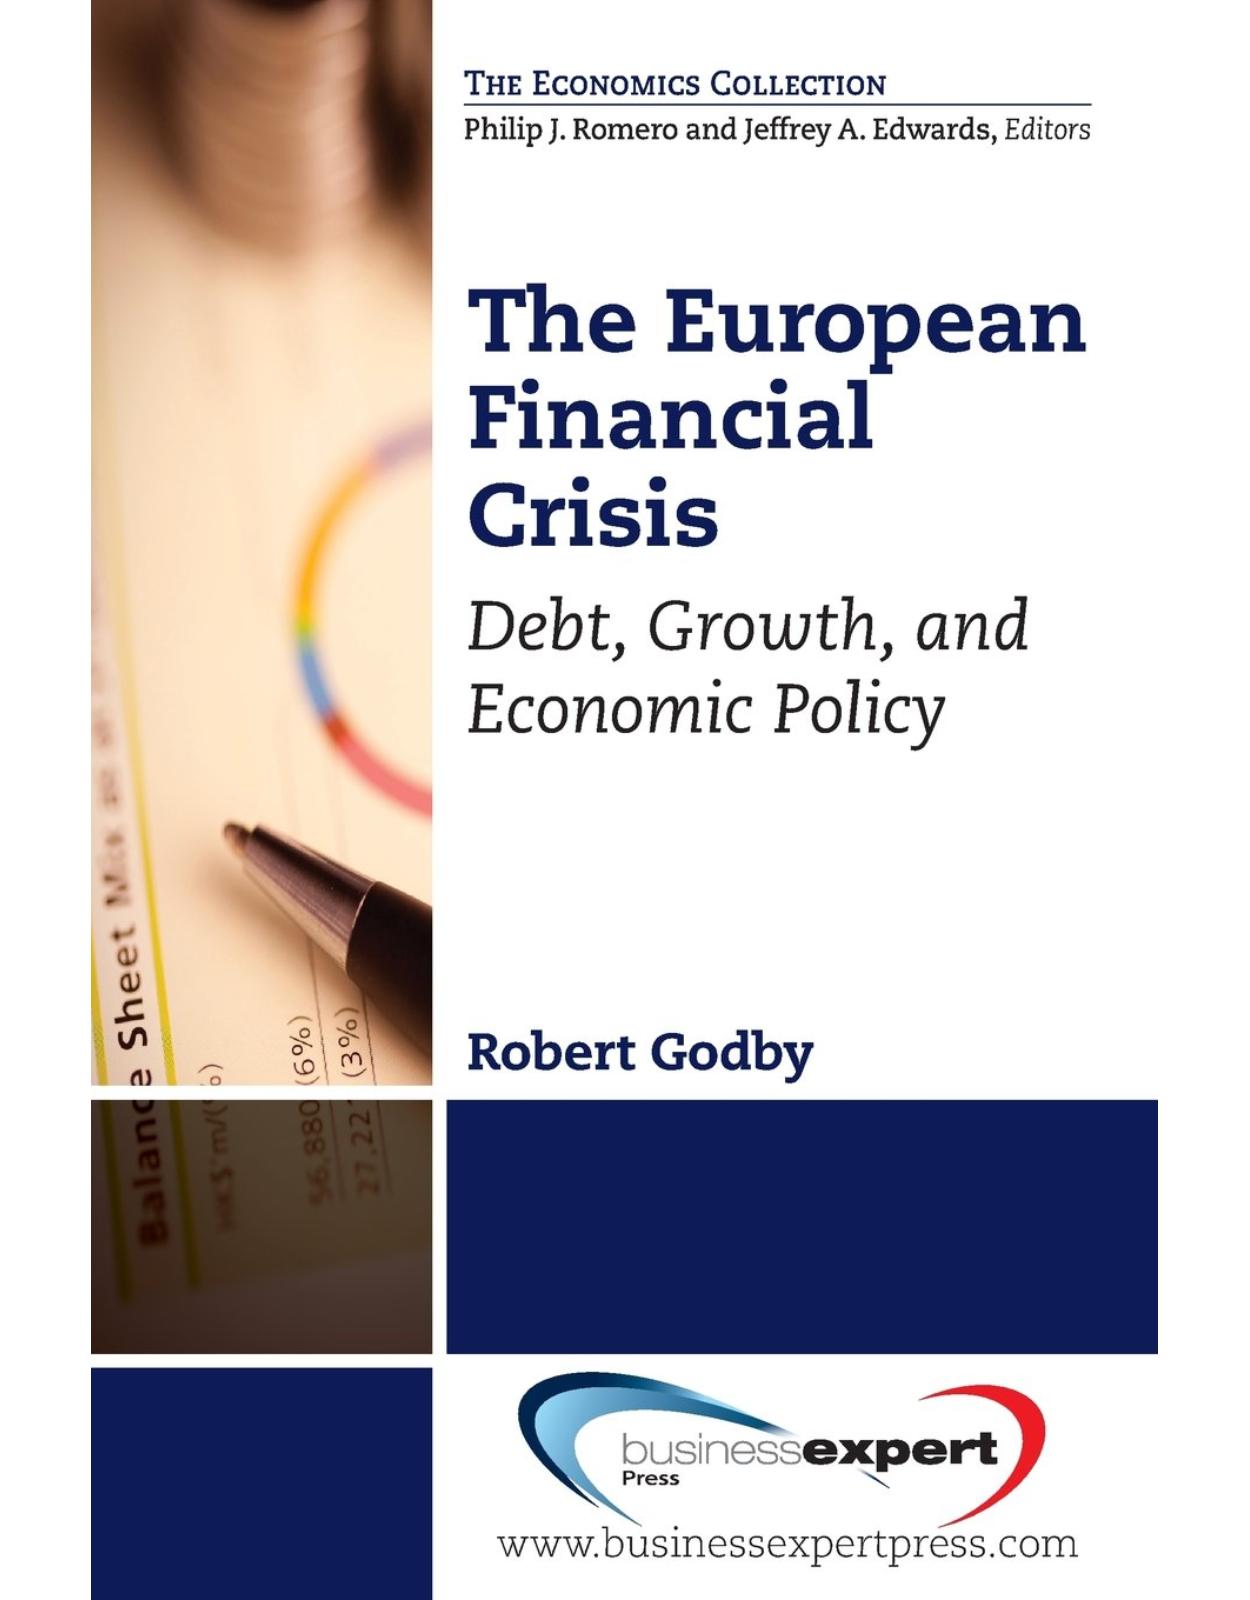 The European Financial Crisis: Debt, Growth, and Economic Policy